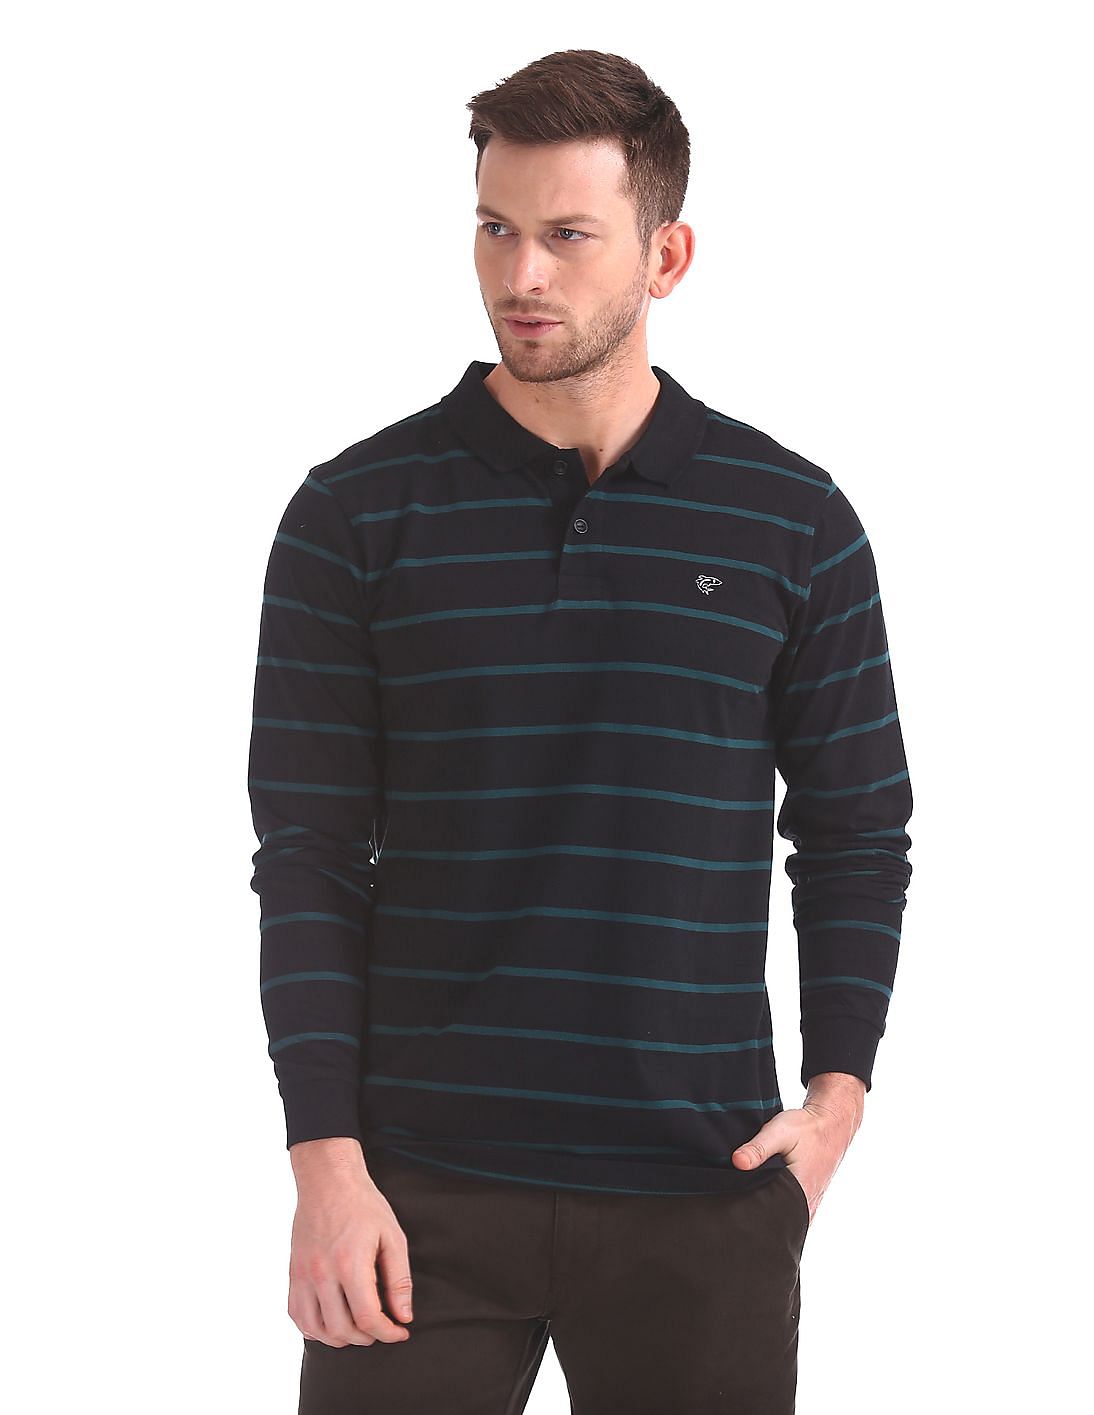 Download Buy Men Striped Long Sleeve Polo Shirt online at NNNOW.com